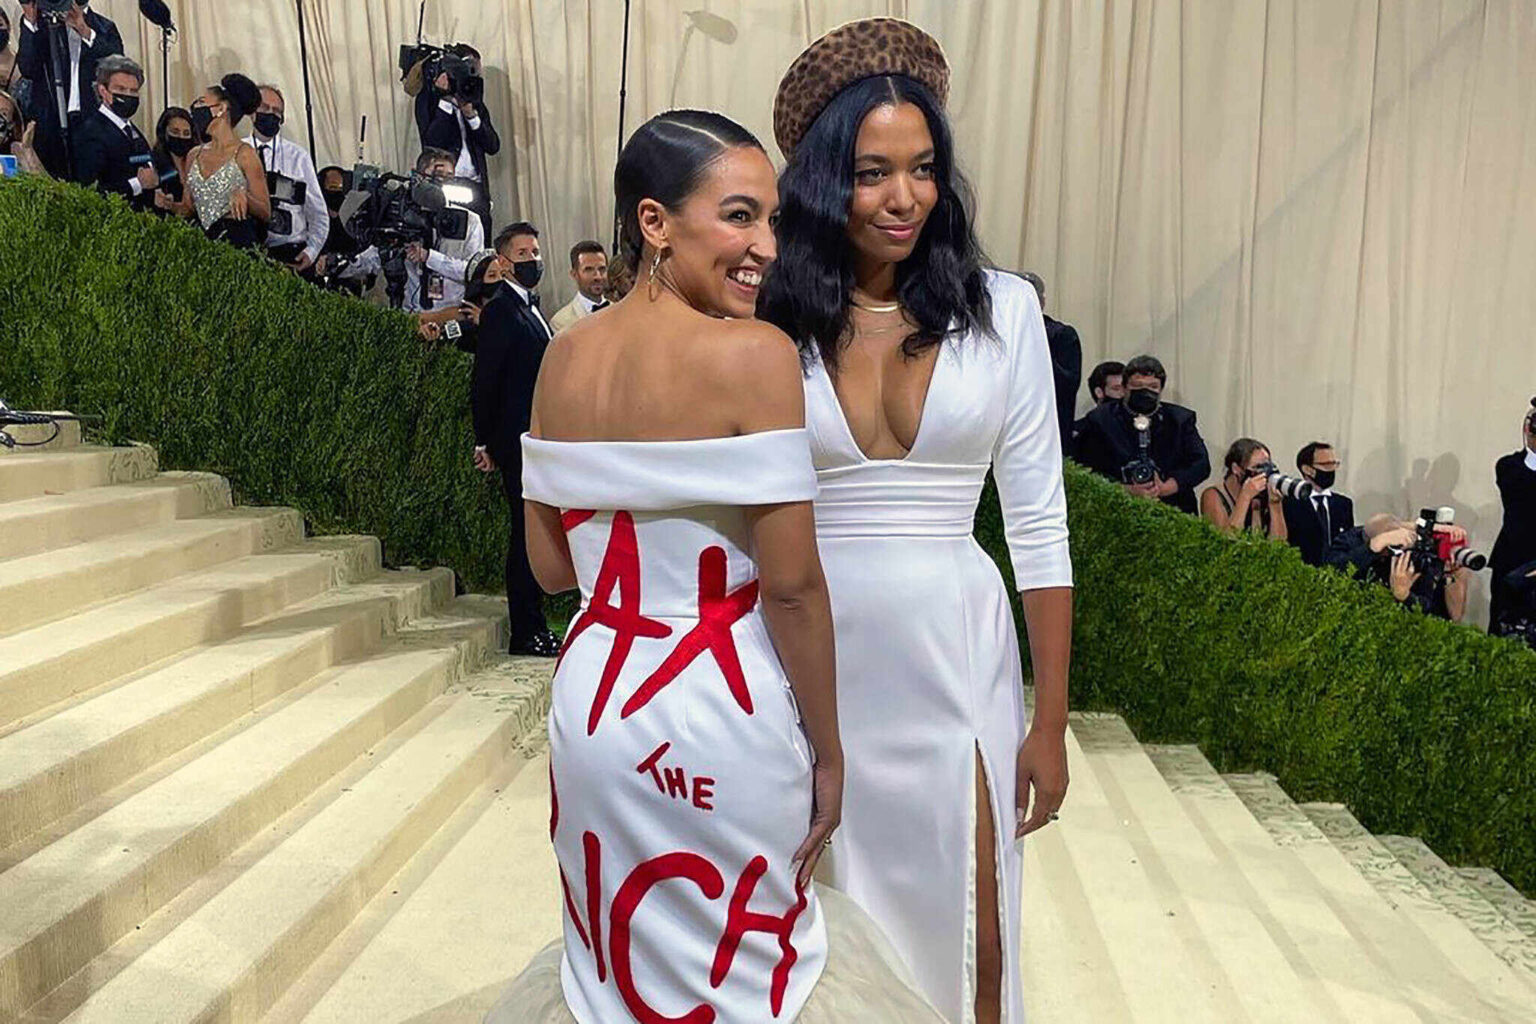 Alexandria Ocasio-Cortez Has Twitter up in arms again over . . . a dress? Dive into the Met Gala controversy and why "tax the rich" just fell flat.